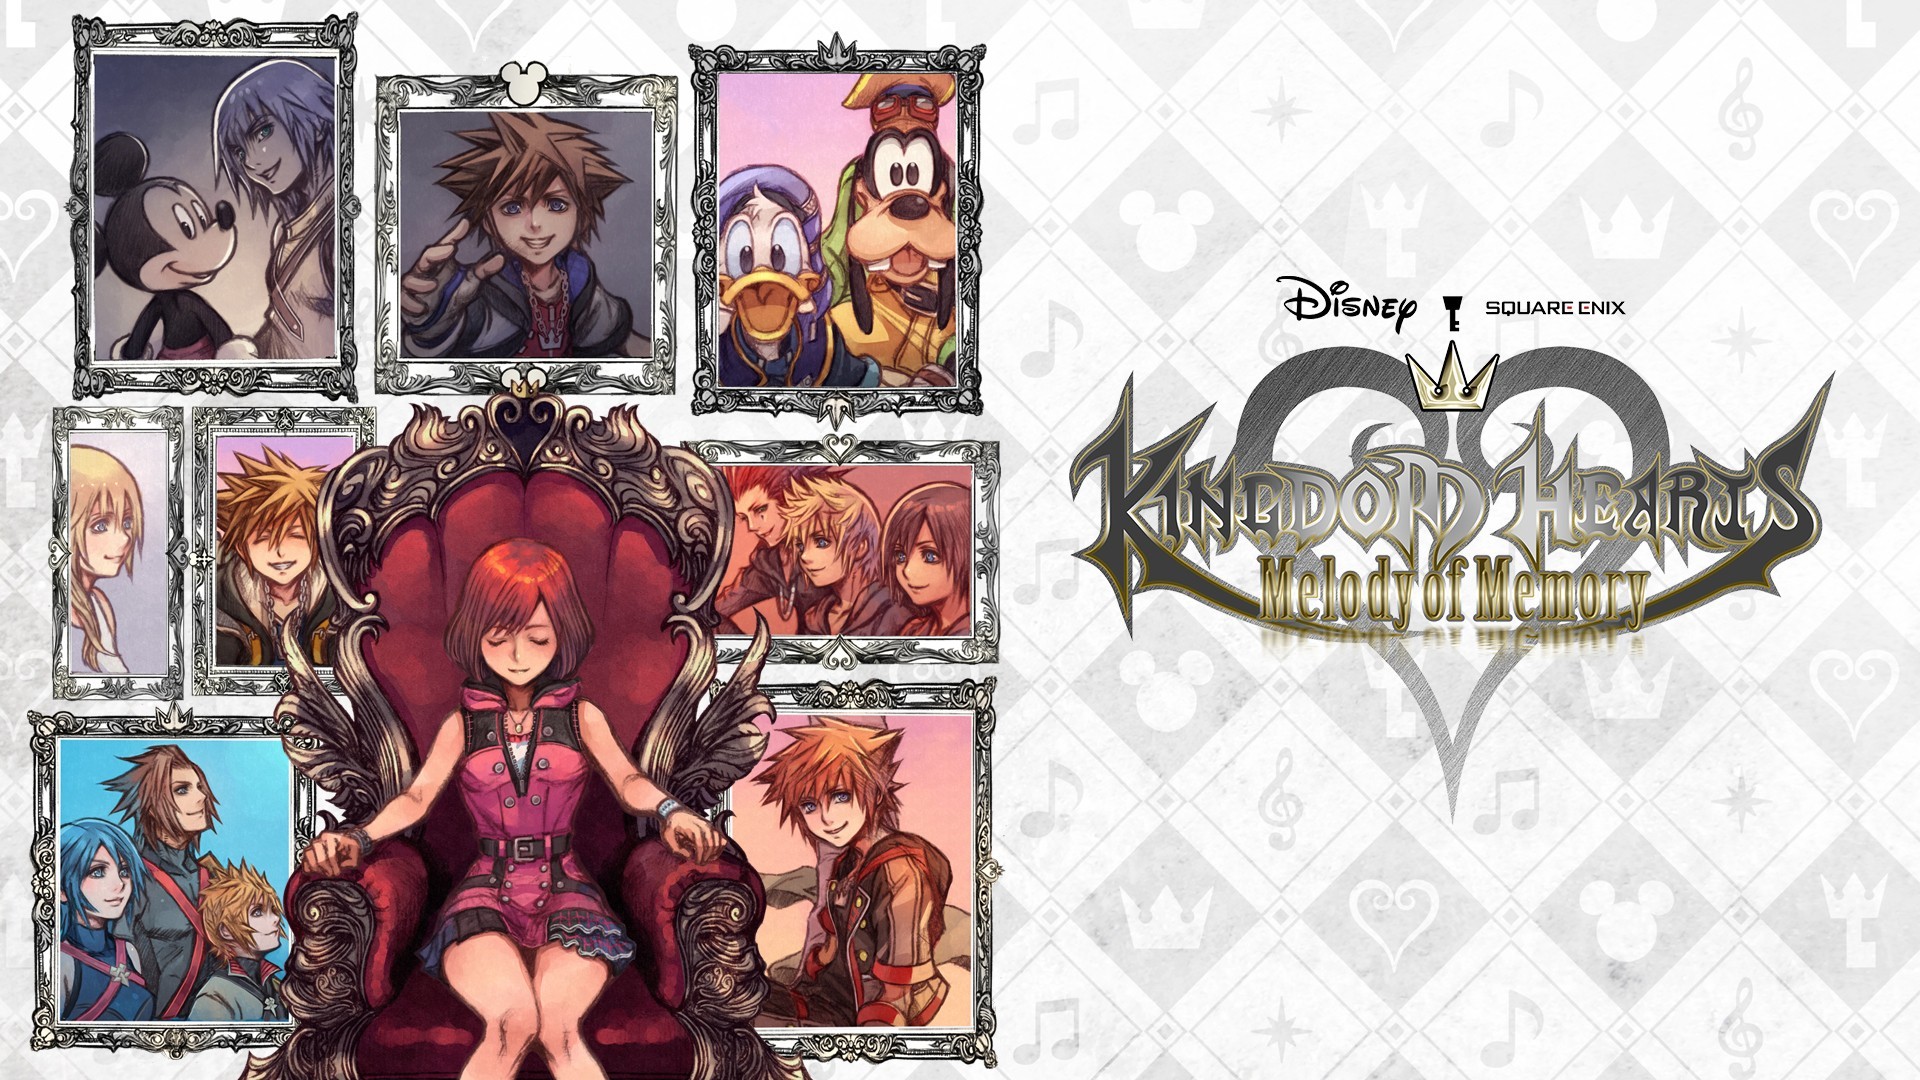 Kingdom Hearts Melody Of Memory Hands On Surprisingly Enjoyable